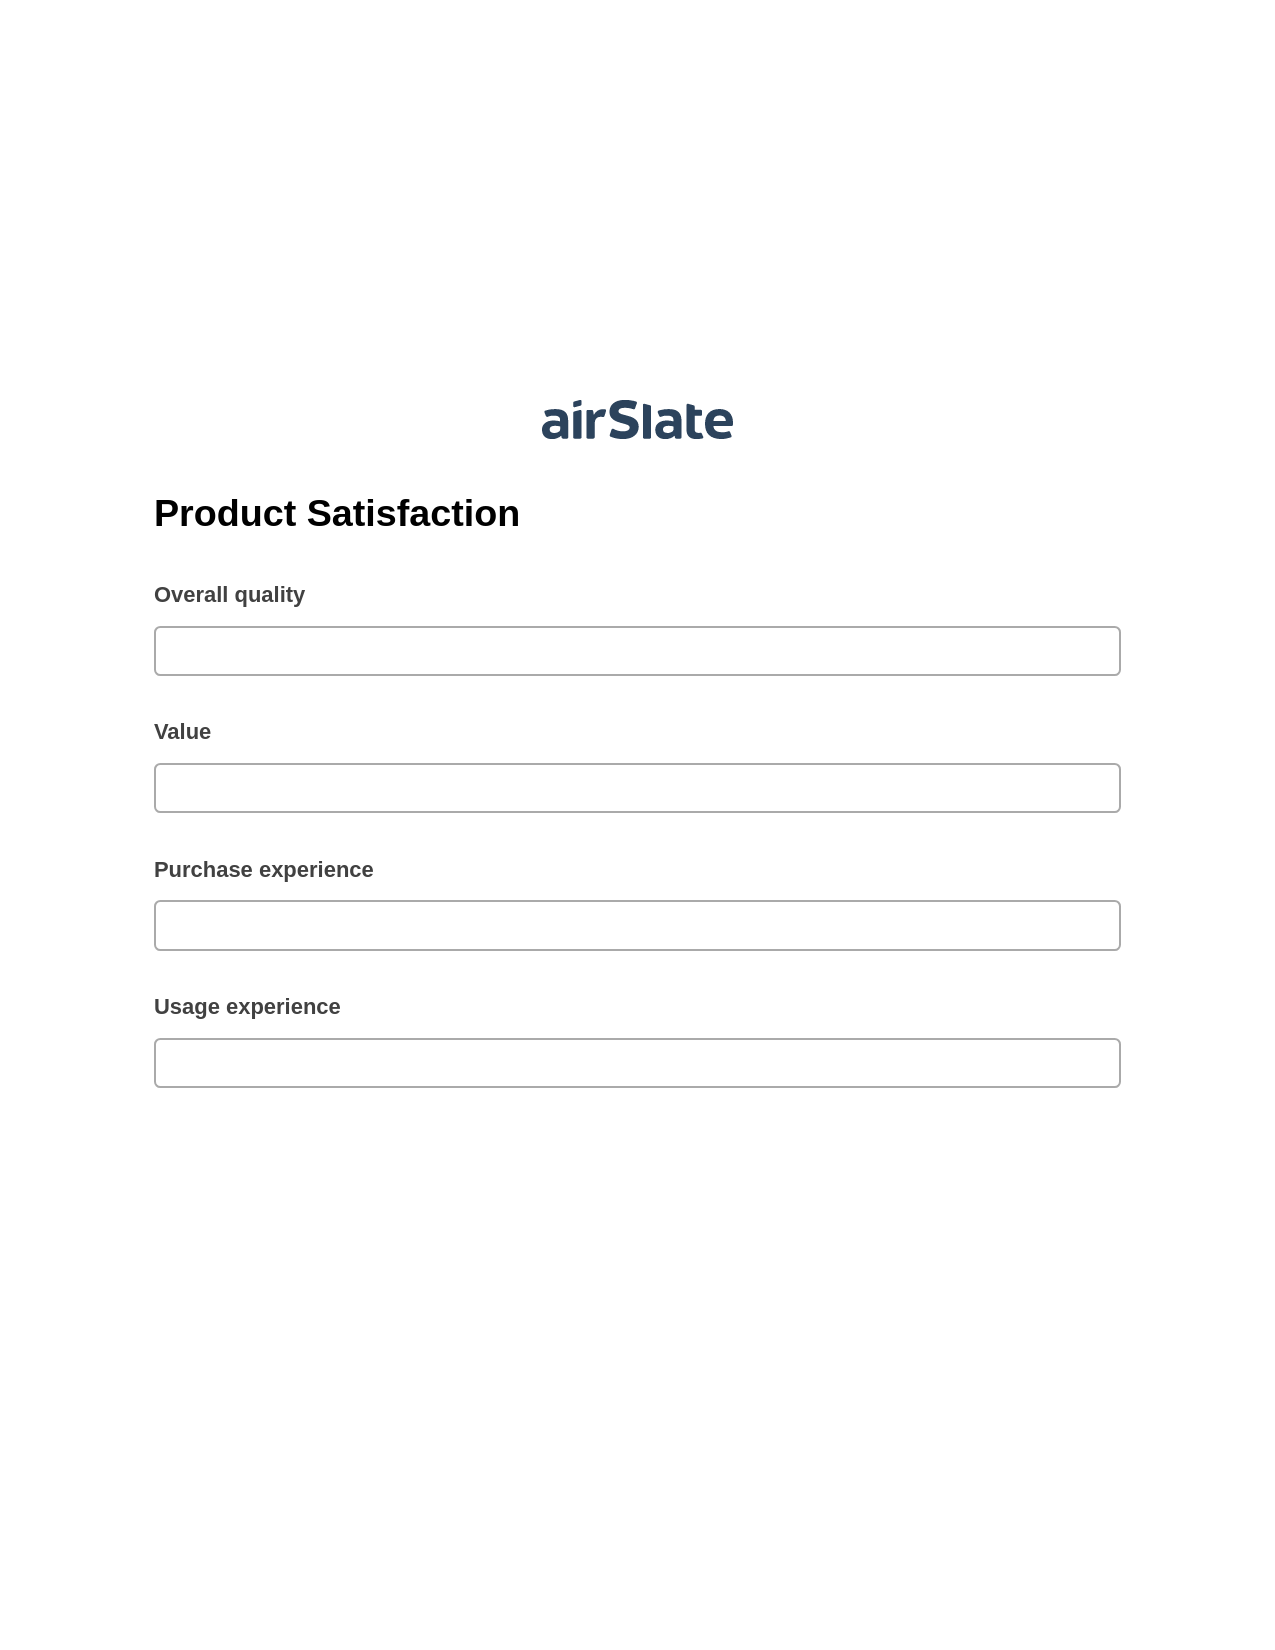 Product Satisfaction Pre-fill from Salesforce Record Bot, Invoke Salesforce Process Bot, Export to Excel 365 Bot